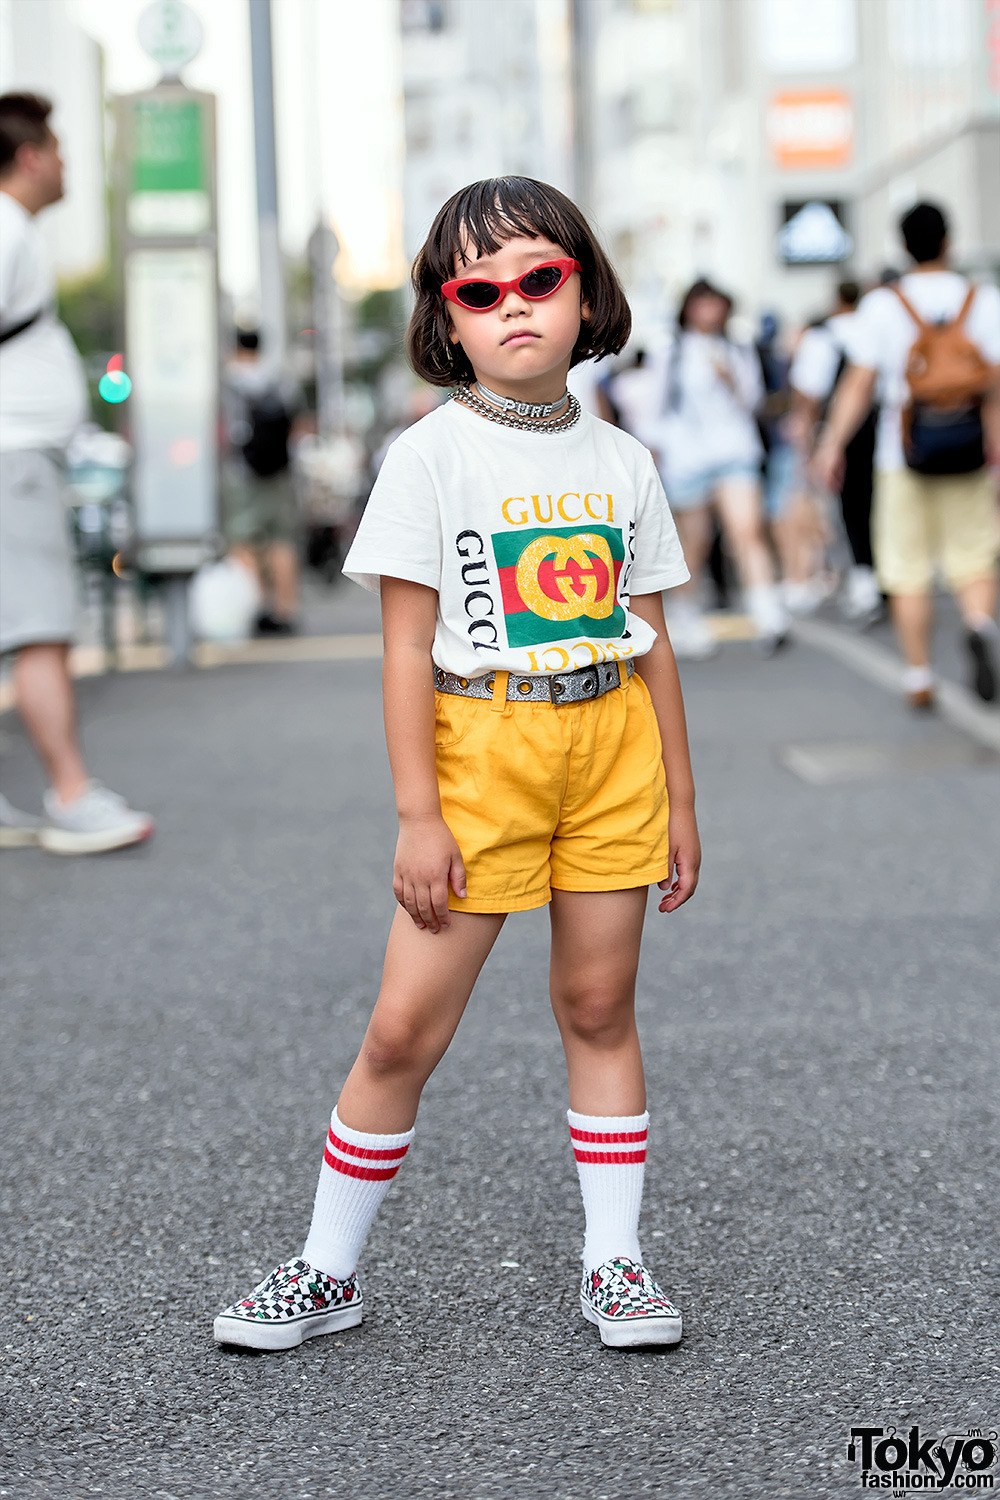 tokyo-fashion:  6-year-old Japanese street style personality Coco Princess on the